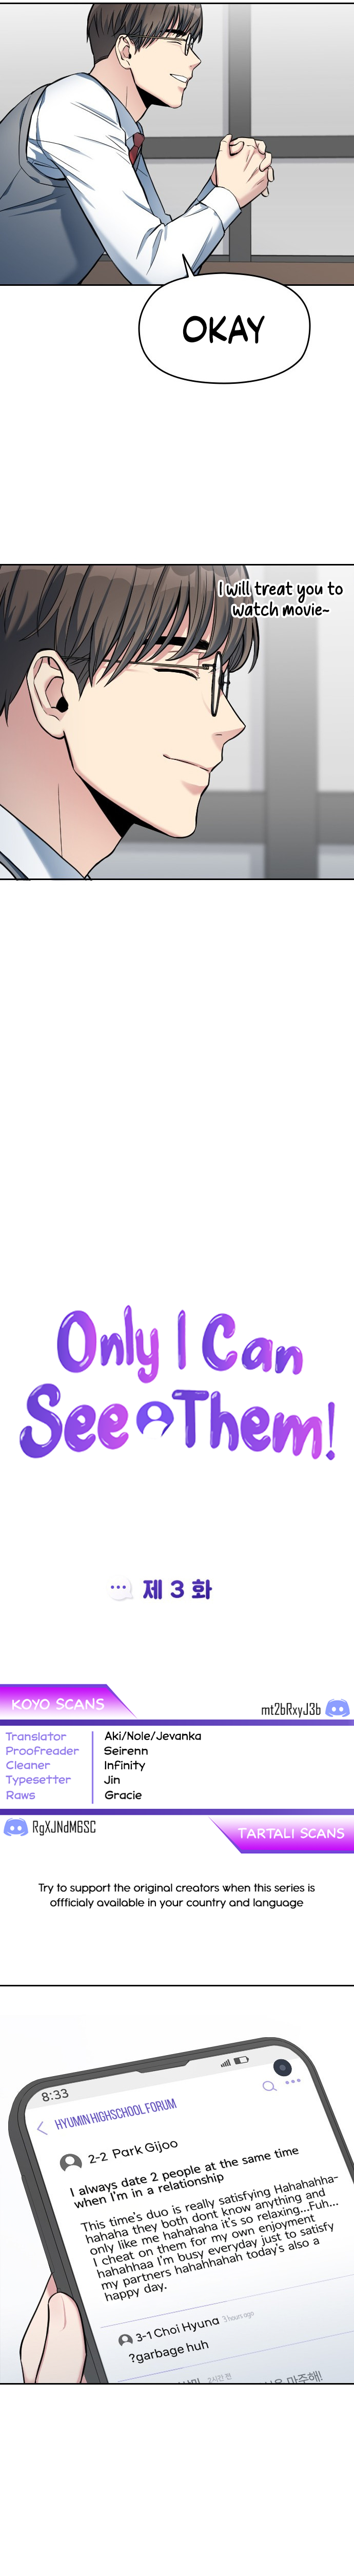 Only I Can See Them! image